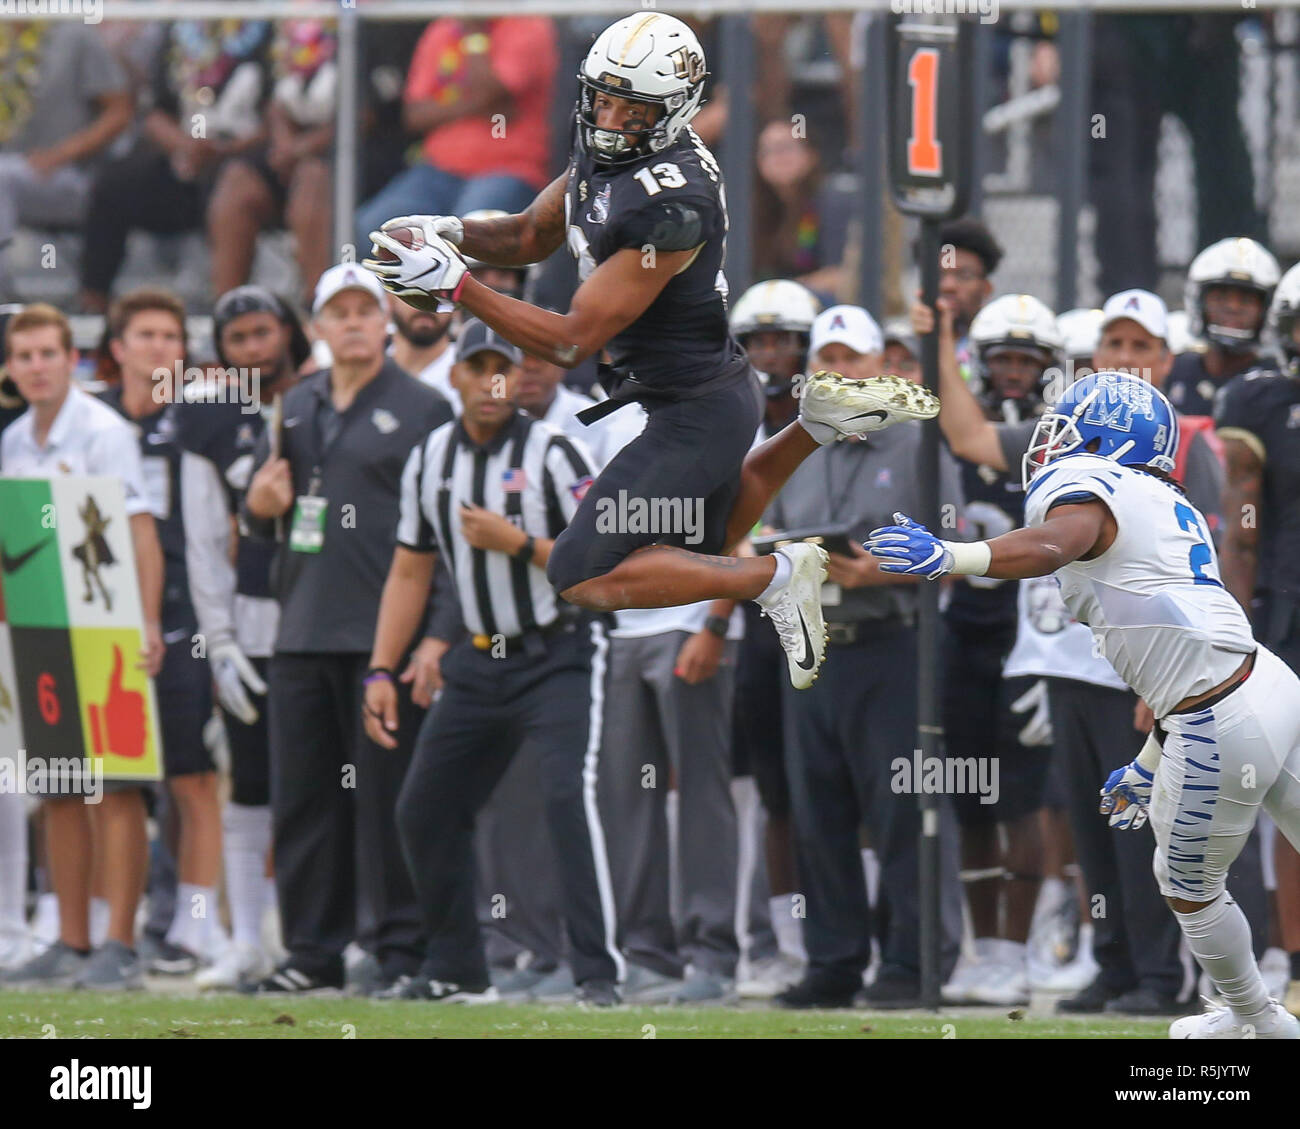 Orlando, Florida, USA. 1st Dec, 2018. UCF WR Gabriel Davis #13 jumps up to grab a pass during the AAC Football Championship game between the Memphis Tigers and the UCF Knights at Spectrum Stadium in Orlando, Florida. Kyle Okita/CSM/Alamy Live News Stock Photo